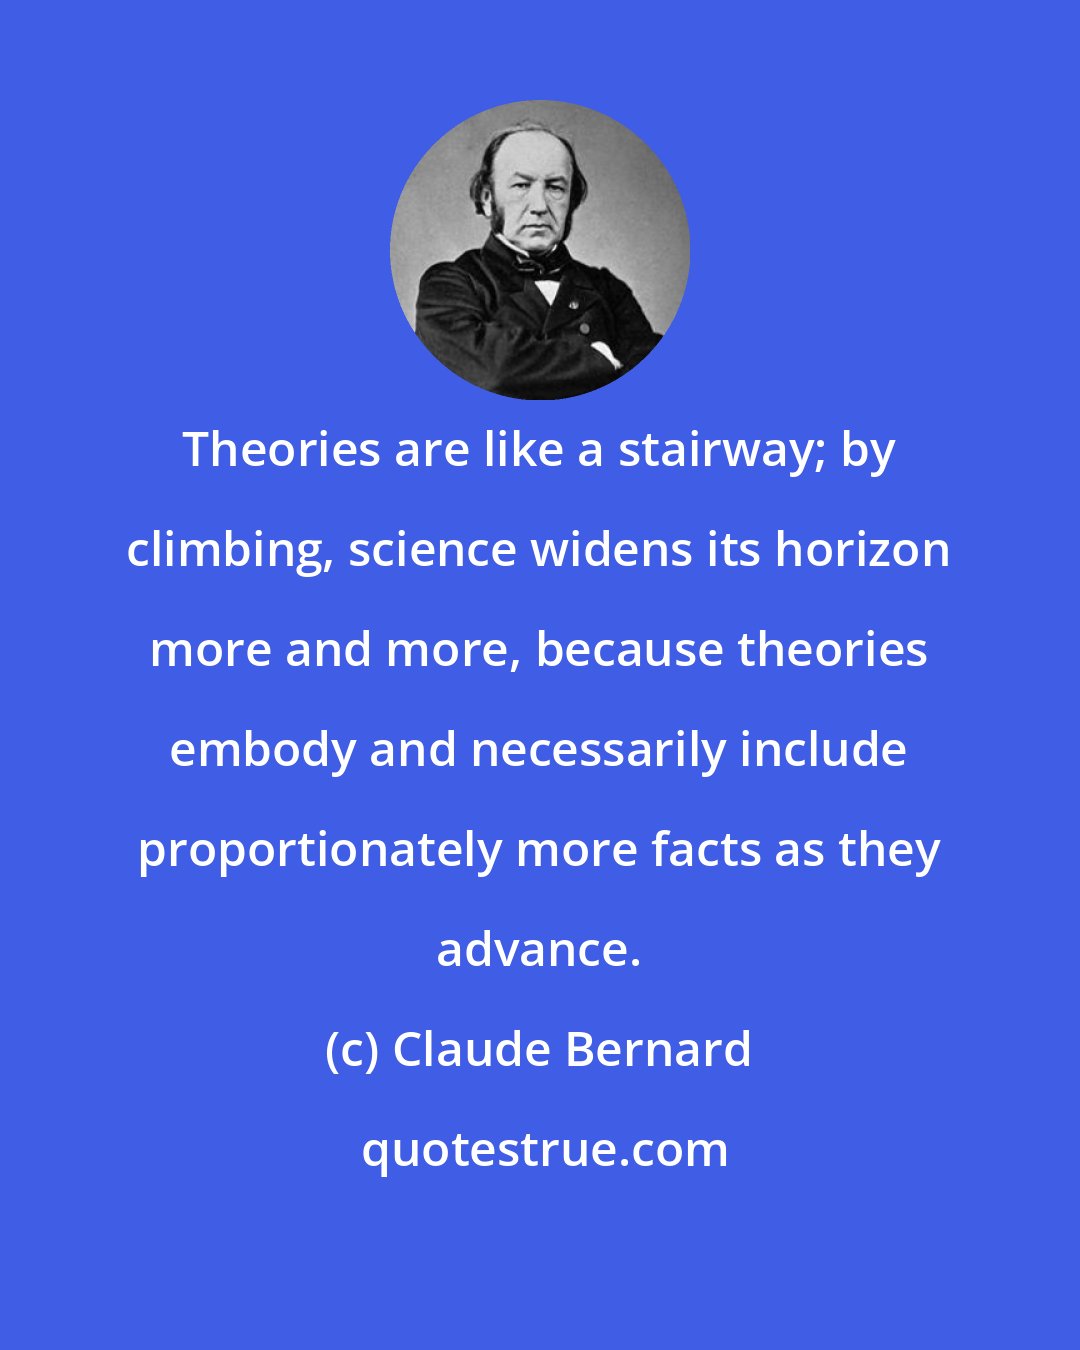 Claude Bernard: Theories are like a stairway; by climbing, science widens its horizon more and more, because theories embody and necessarily include proportionately more facts as they advance.